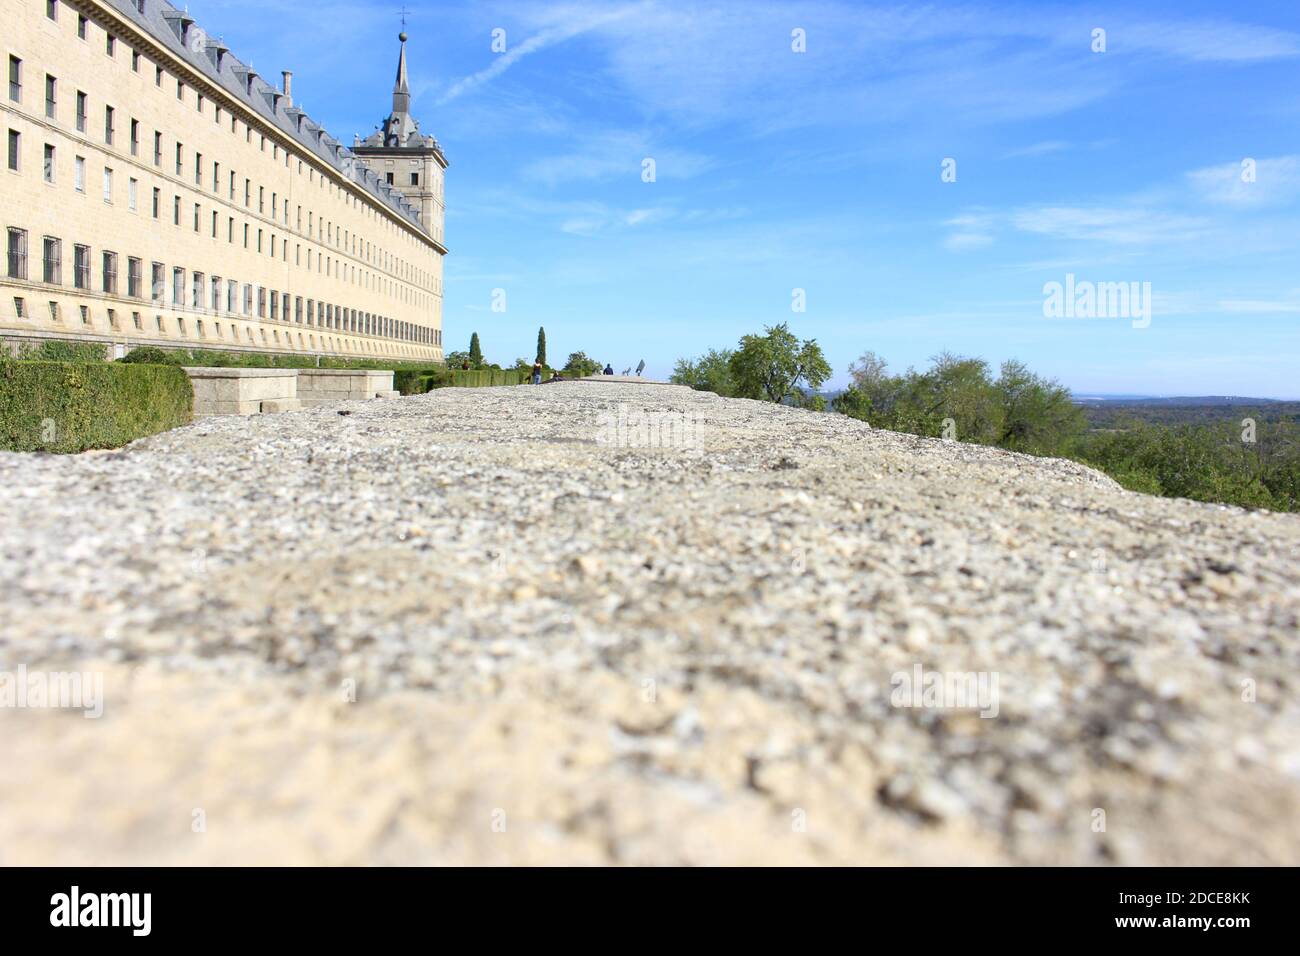 El Escorial, view from the gardens Stock Photo